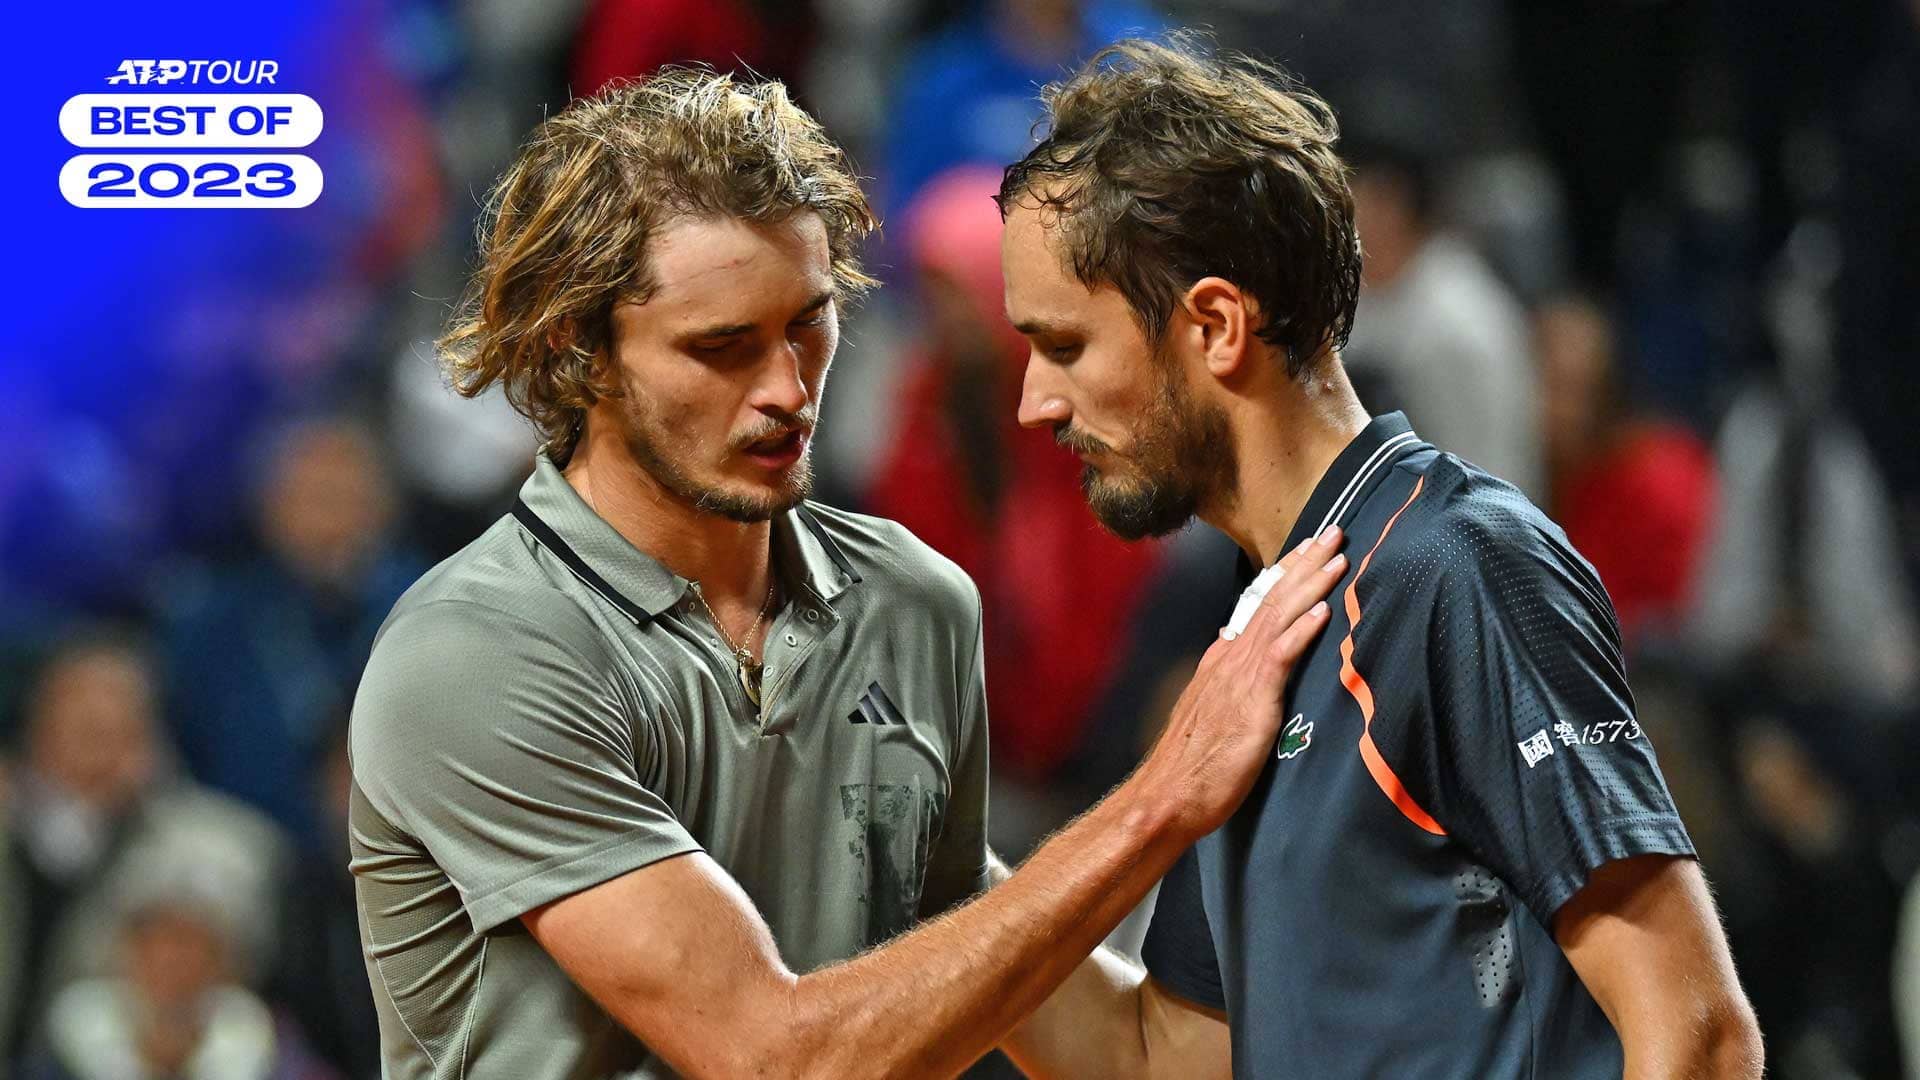 After six Lexus ATP Head2Head meetings in 2023, Alexander Zverev and Daniil Medvedev have now played 18 tour-level matches against one another.